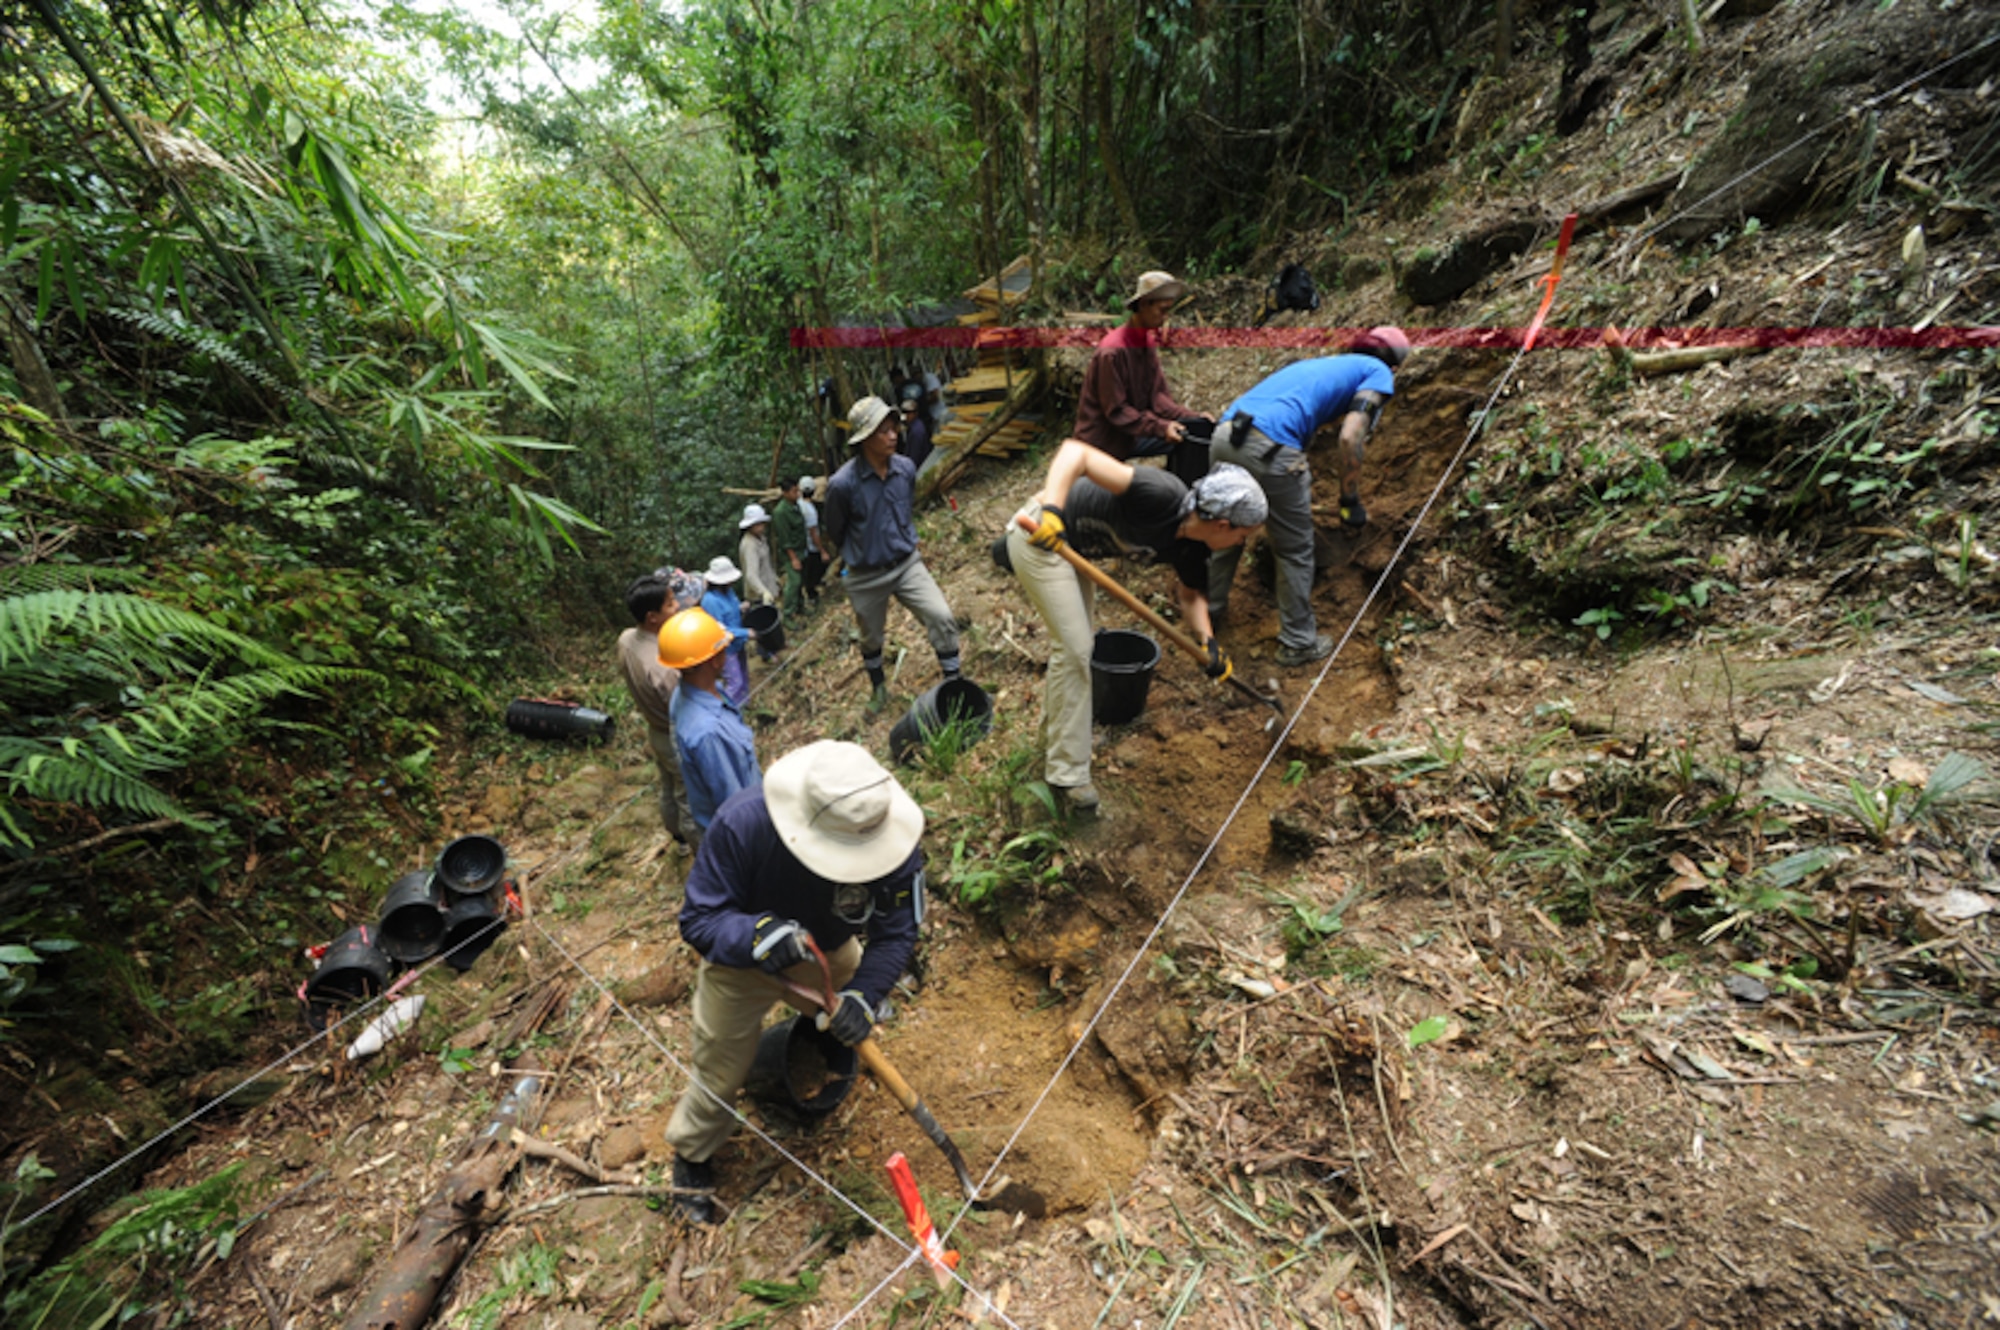 Joint POW/MIA Accounting Command and Vietnamese workers excavate a 4x4 meter unit at a recovery site in the Thua Thien-Hue province, Socialist Republic of Vietnam. Four recovery teams searched for four missing individuals associated with Vietnam War aircraft losses during the 40 day mission. The mission of the JPAC is to achieve the fullest possible accounting of all Americans missing as a result of the nation's past conflicts. (JPAC photo by U.S. Air Force Staff Sgt. Aaron Allmon/Released)